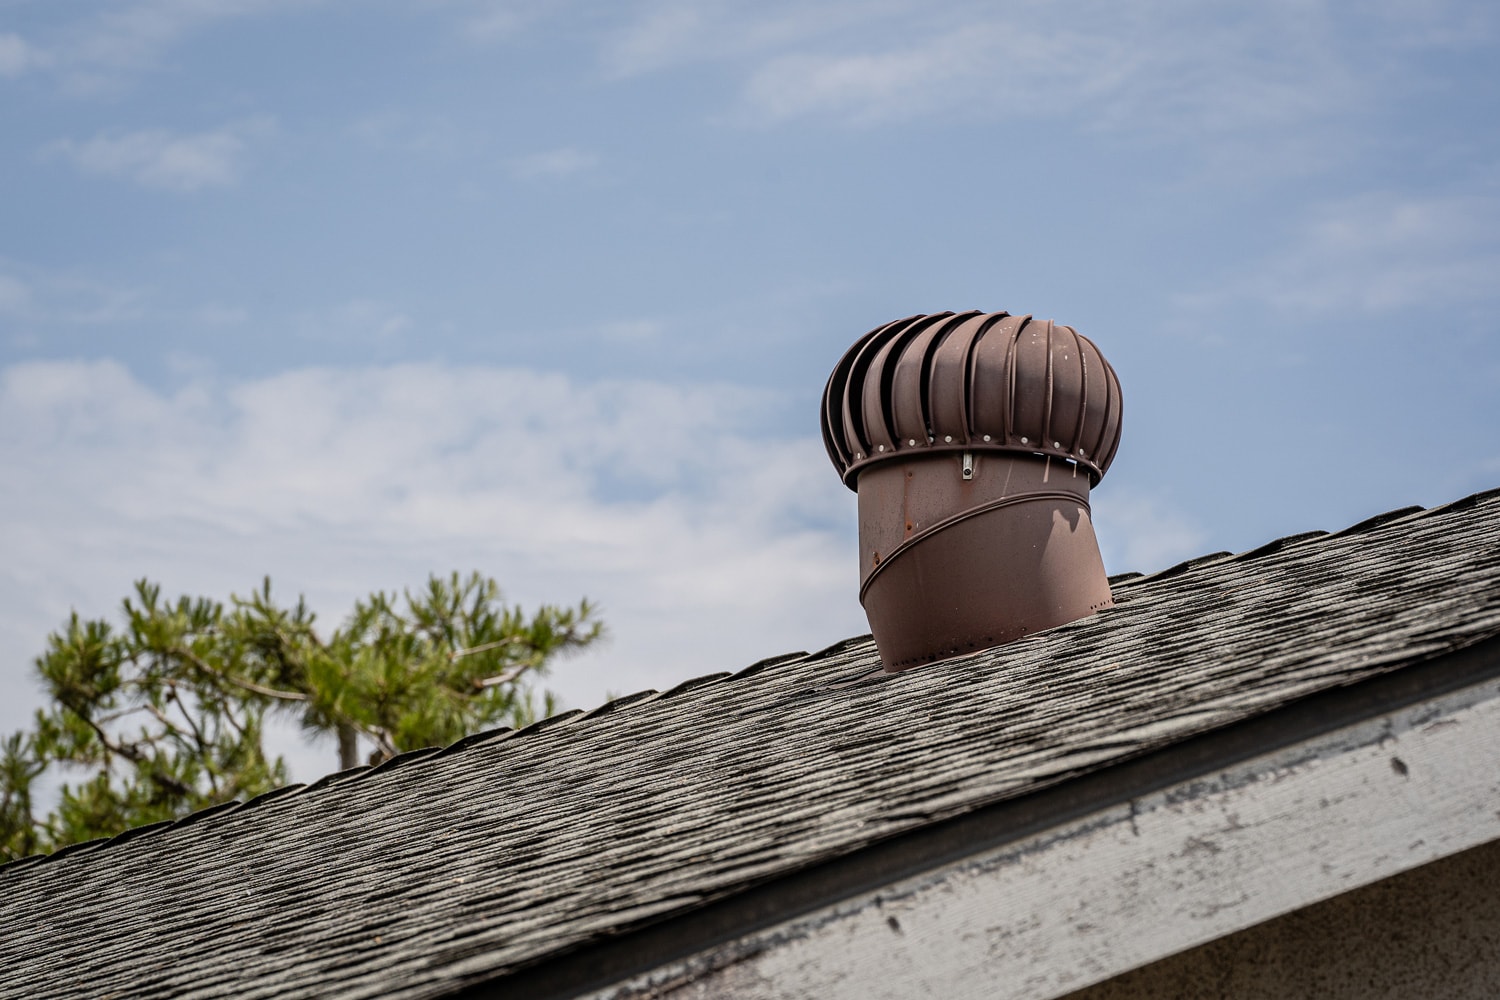 Old Residential House Roof with Aluminum Roof Turbine Vent on Blue Sky Outdoor Ventilation Wind Efficiency Energy